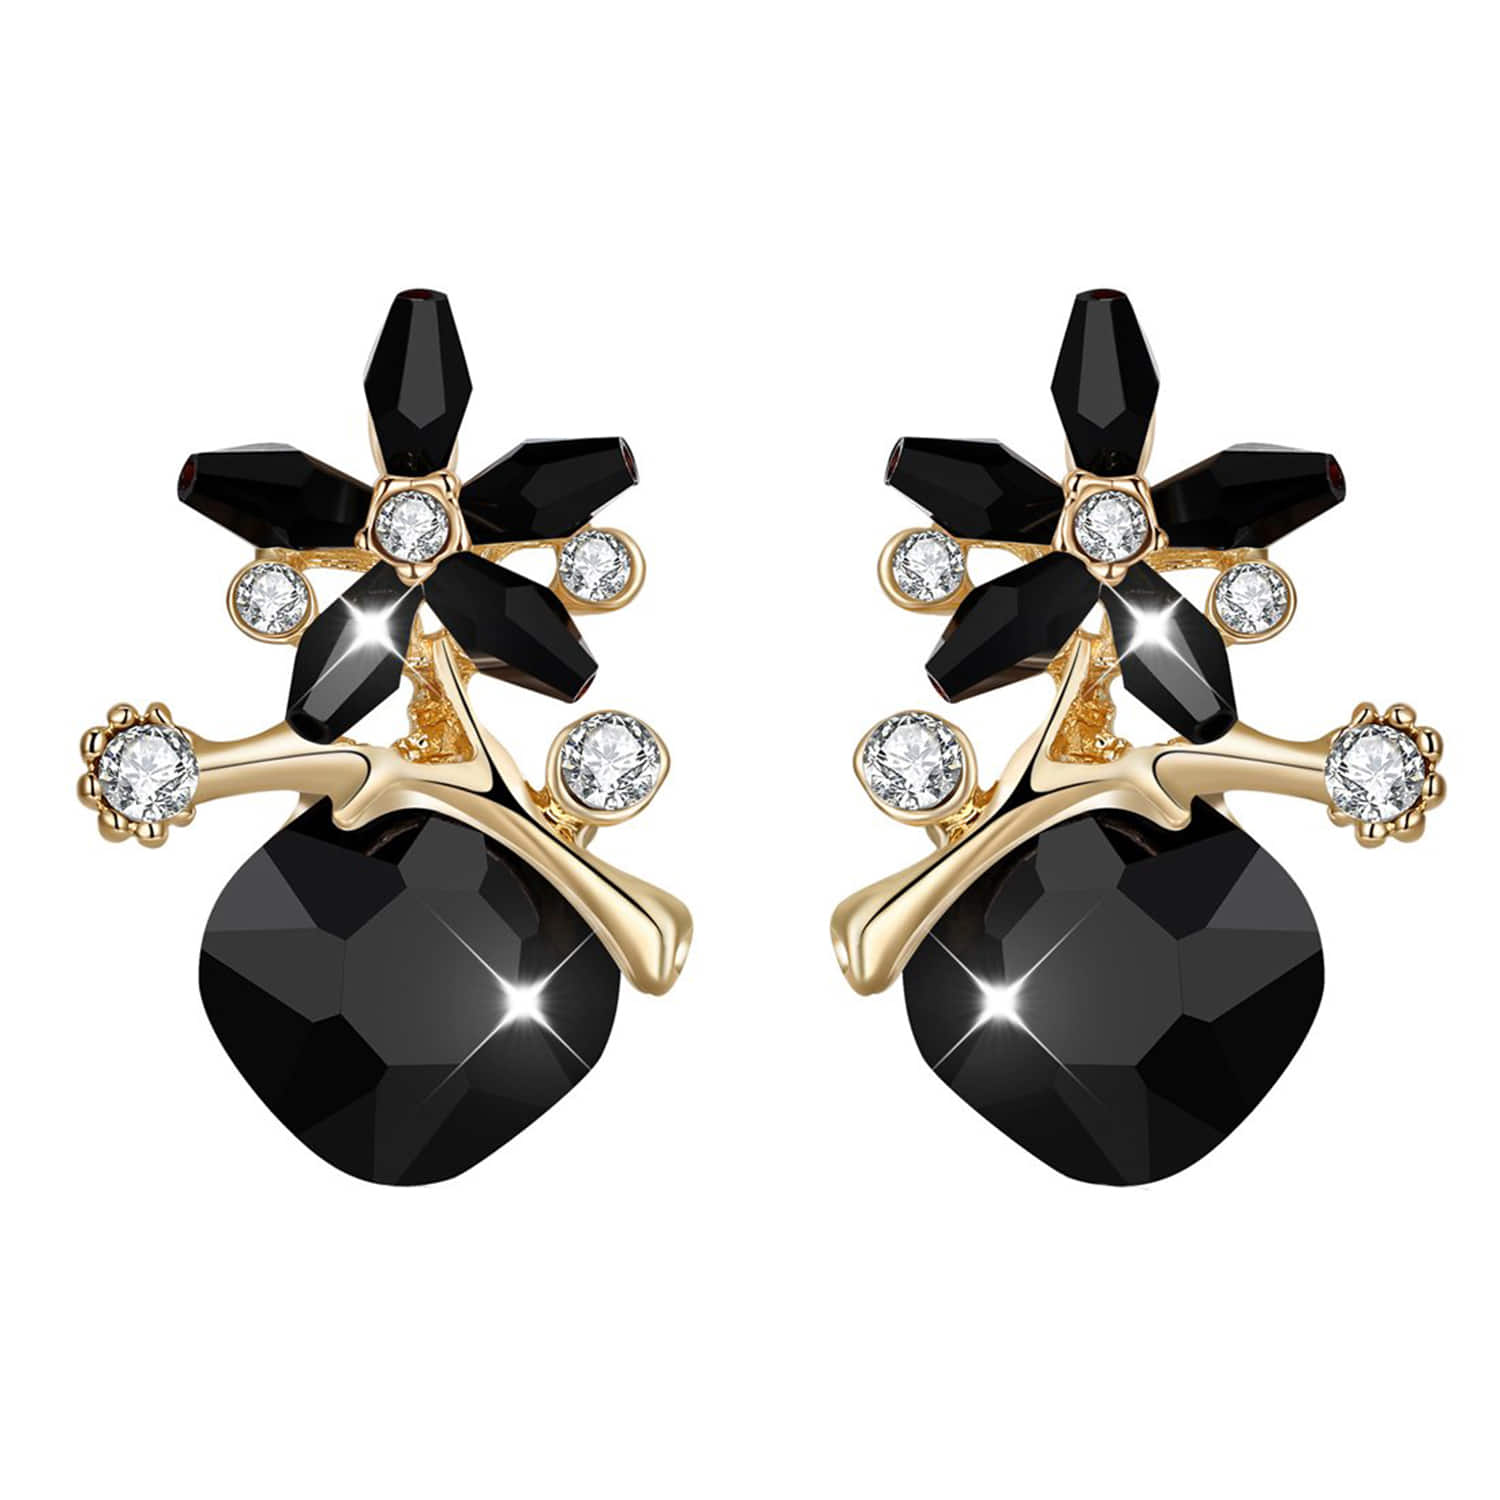 Buy ONKAR JEWELLER Traditional Jewelry Earrings for women Black Gem Rich  Design Earrings for Girls and Women Assorted Colours at Amazonin